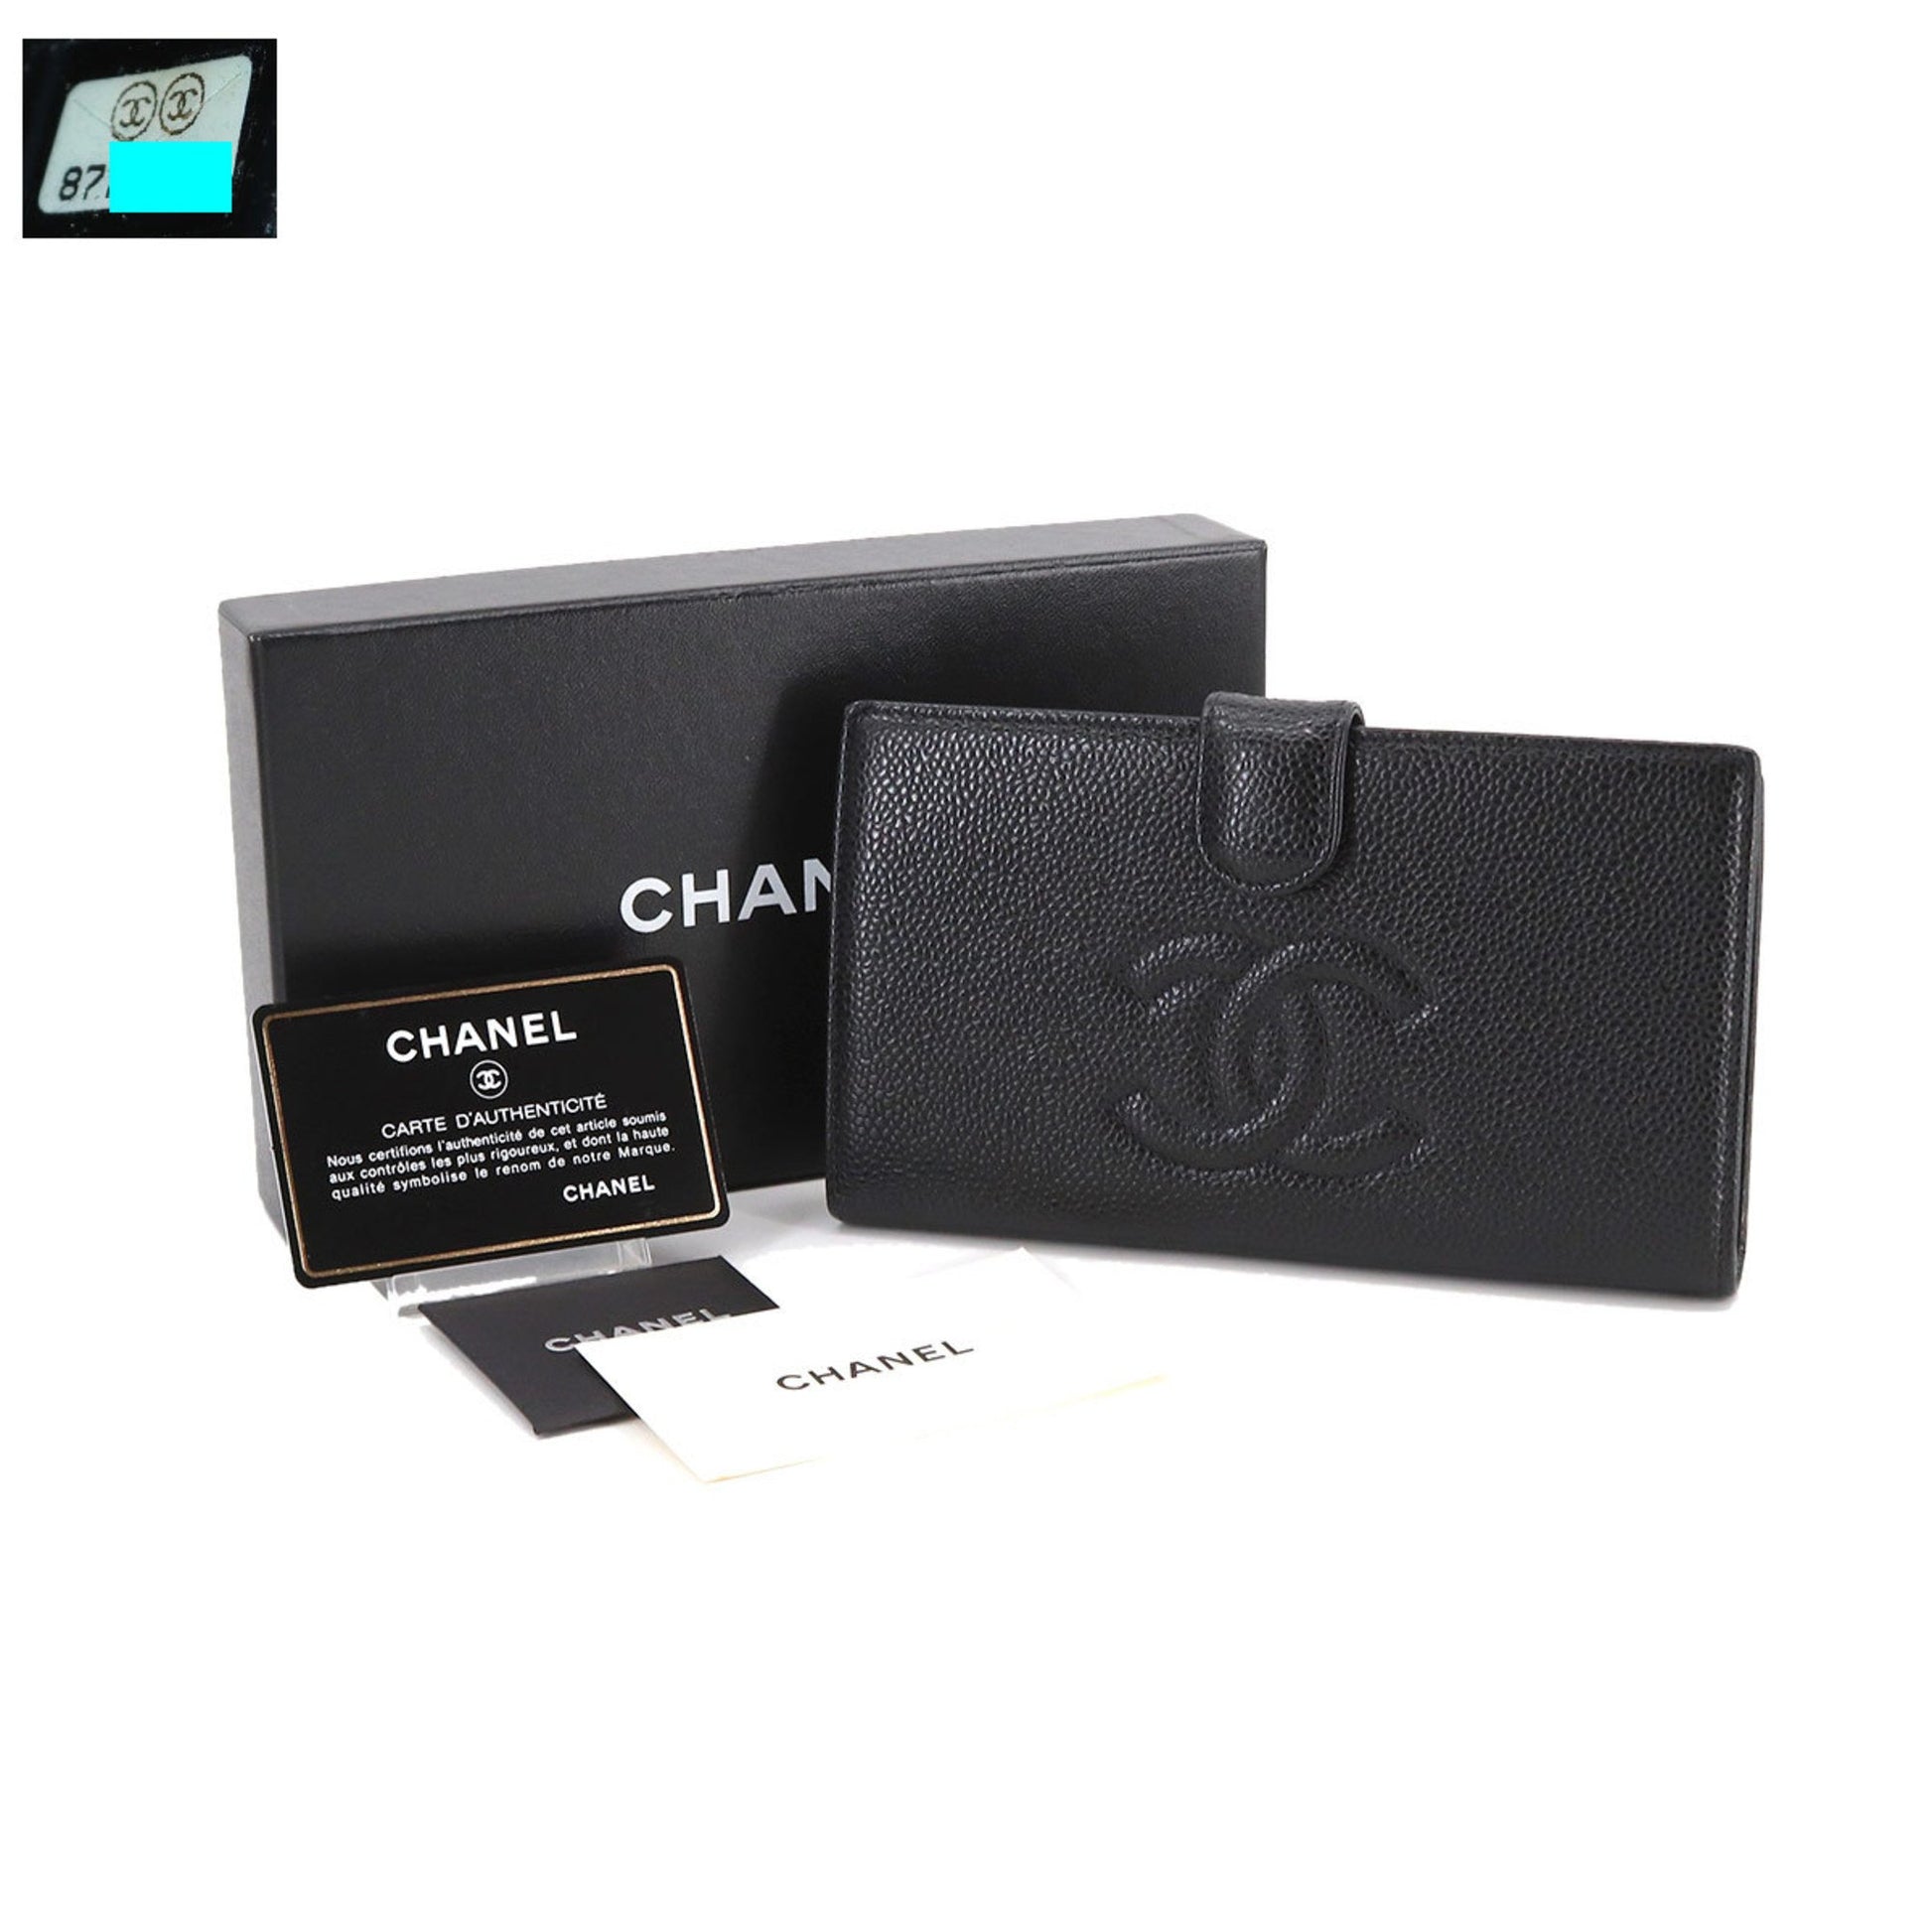 Get the best deals on CHANEL Blue Wallets for Women when you shop